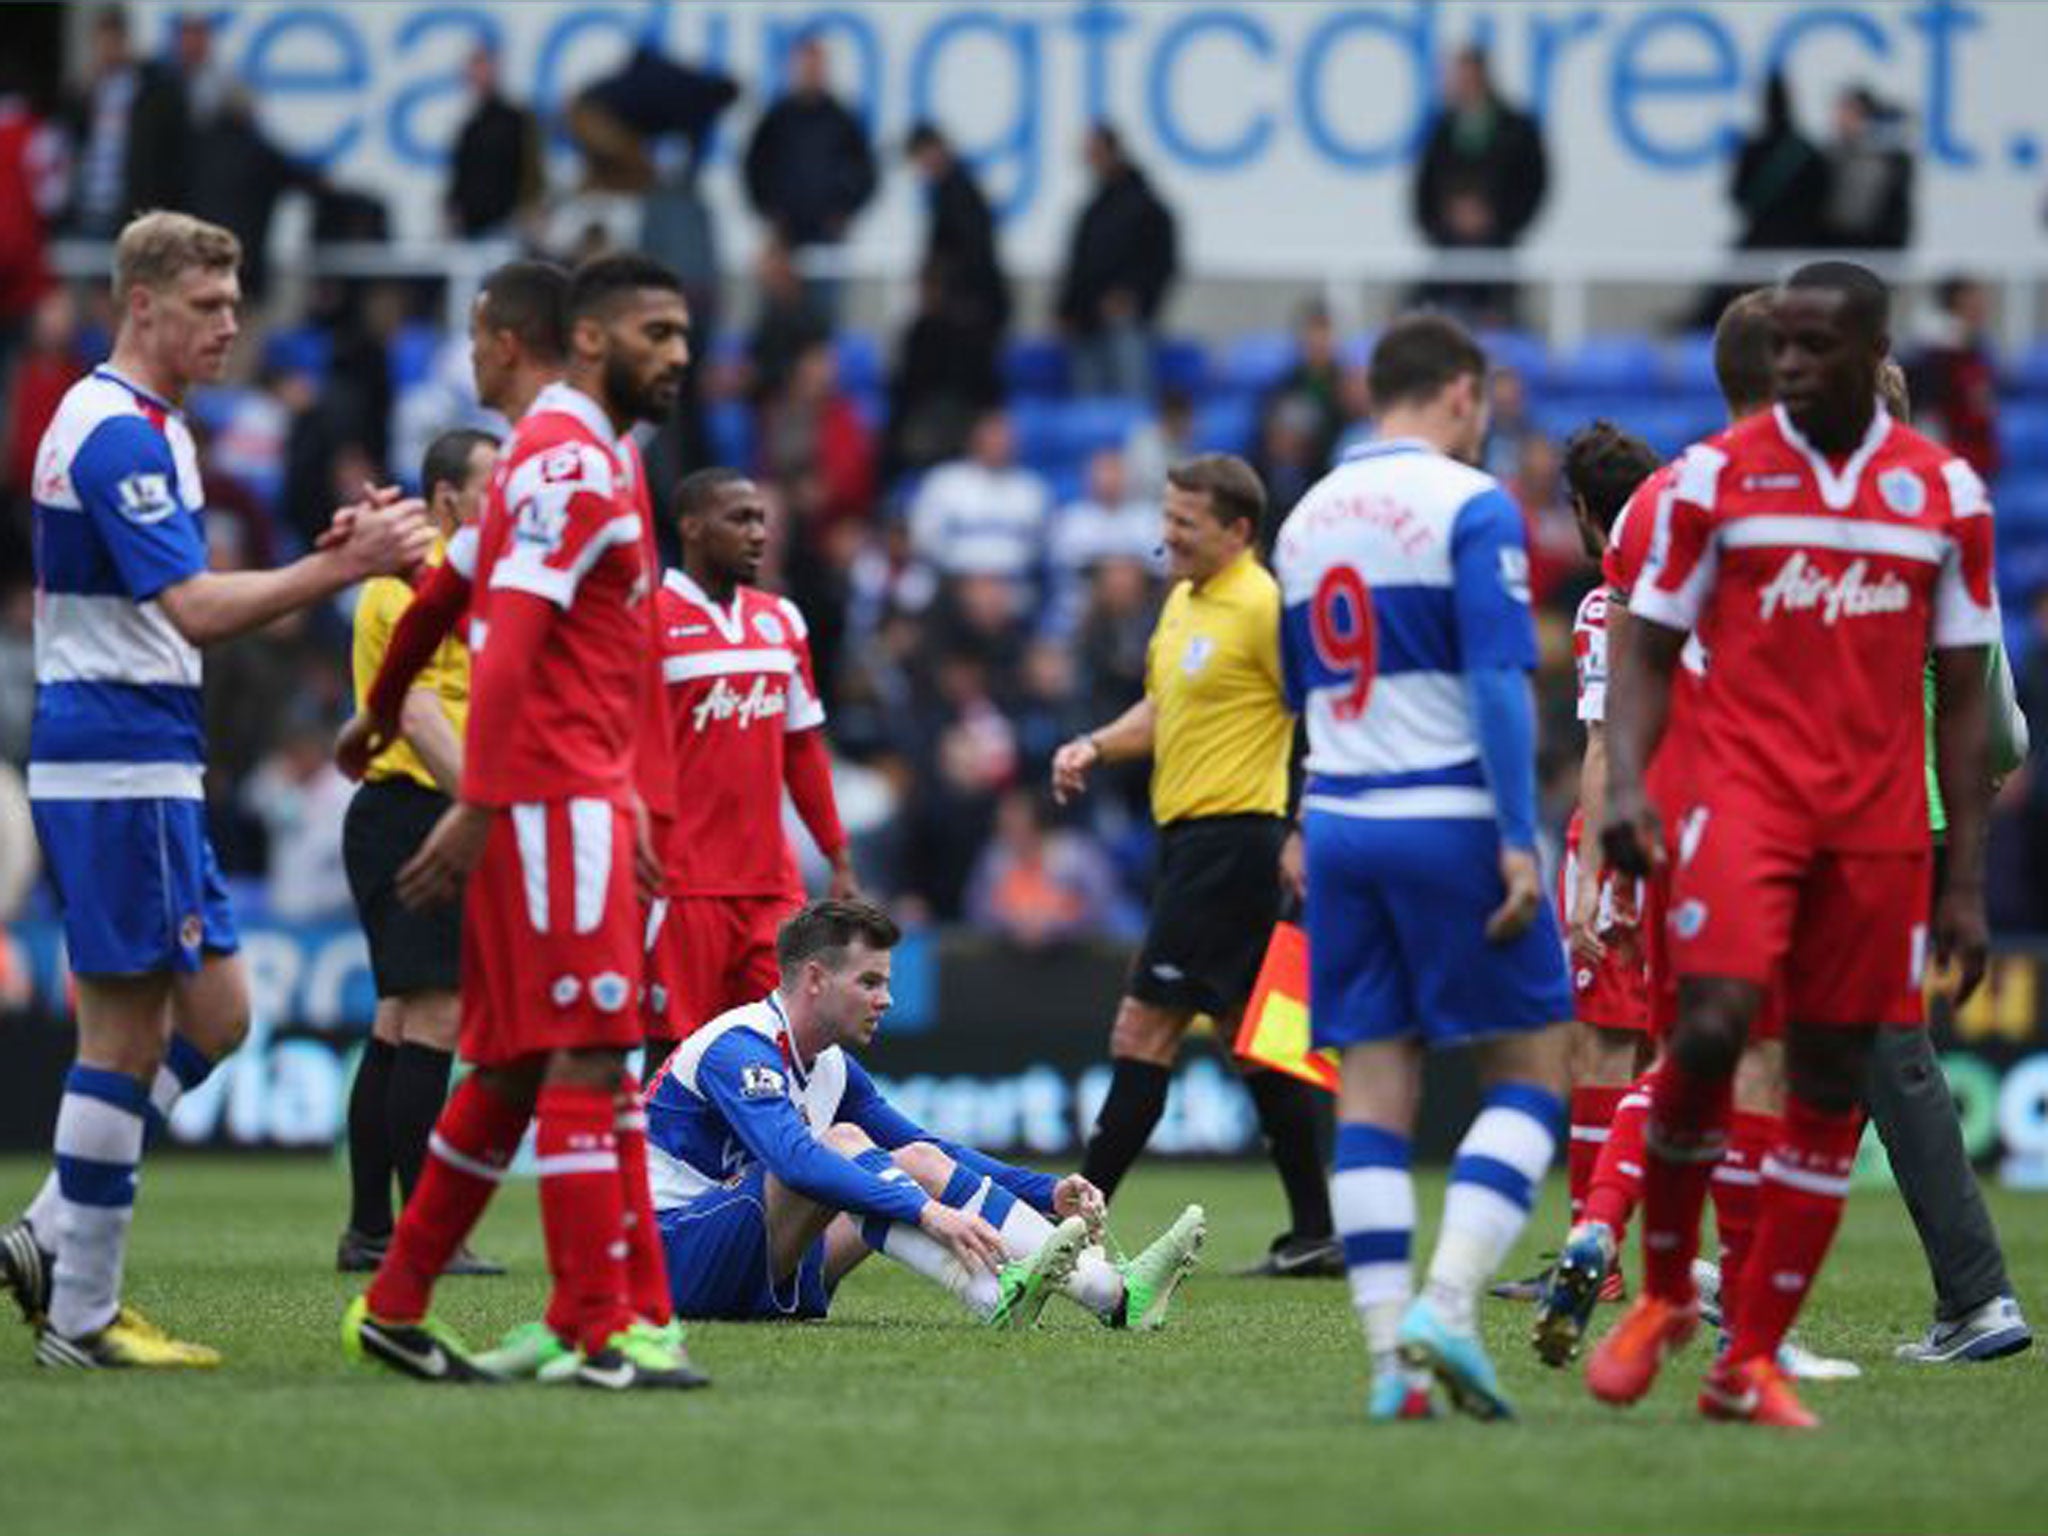 Danny Guthrie of Reading sits on the ground dejected after his team and QPR were relegated during the Barclays Premier League match between Reading and Queens Park Rangers at the Madejski Stadium